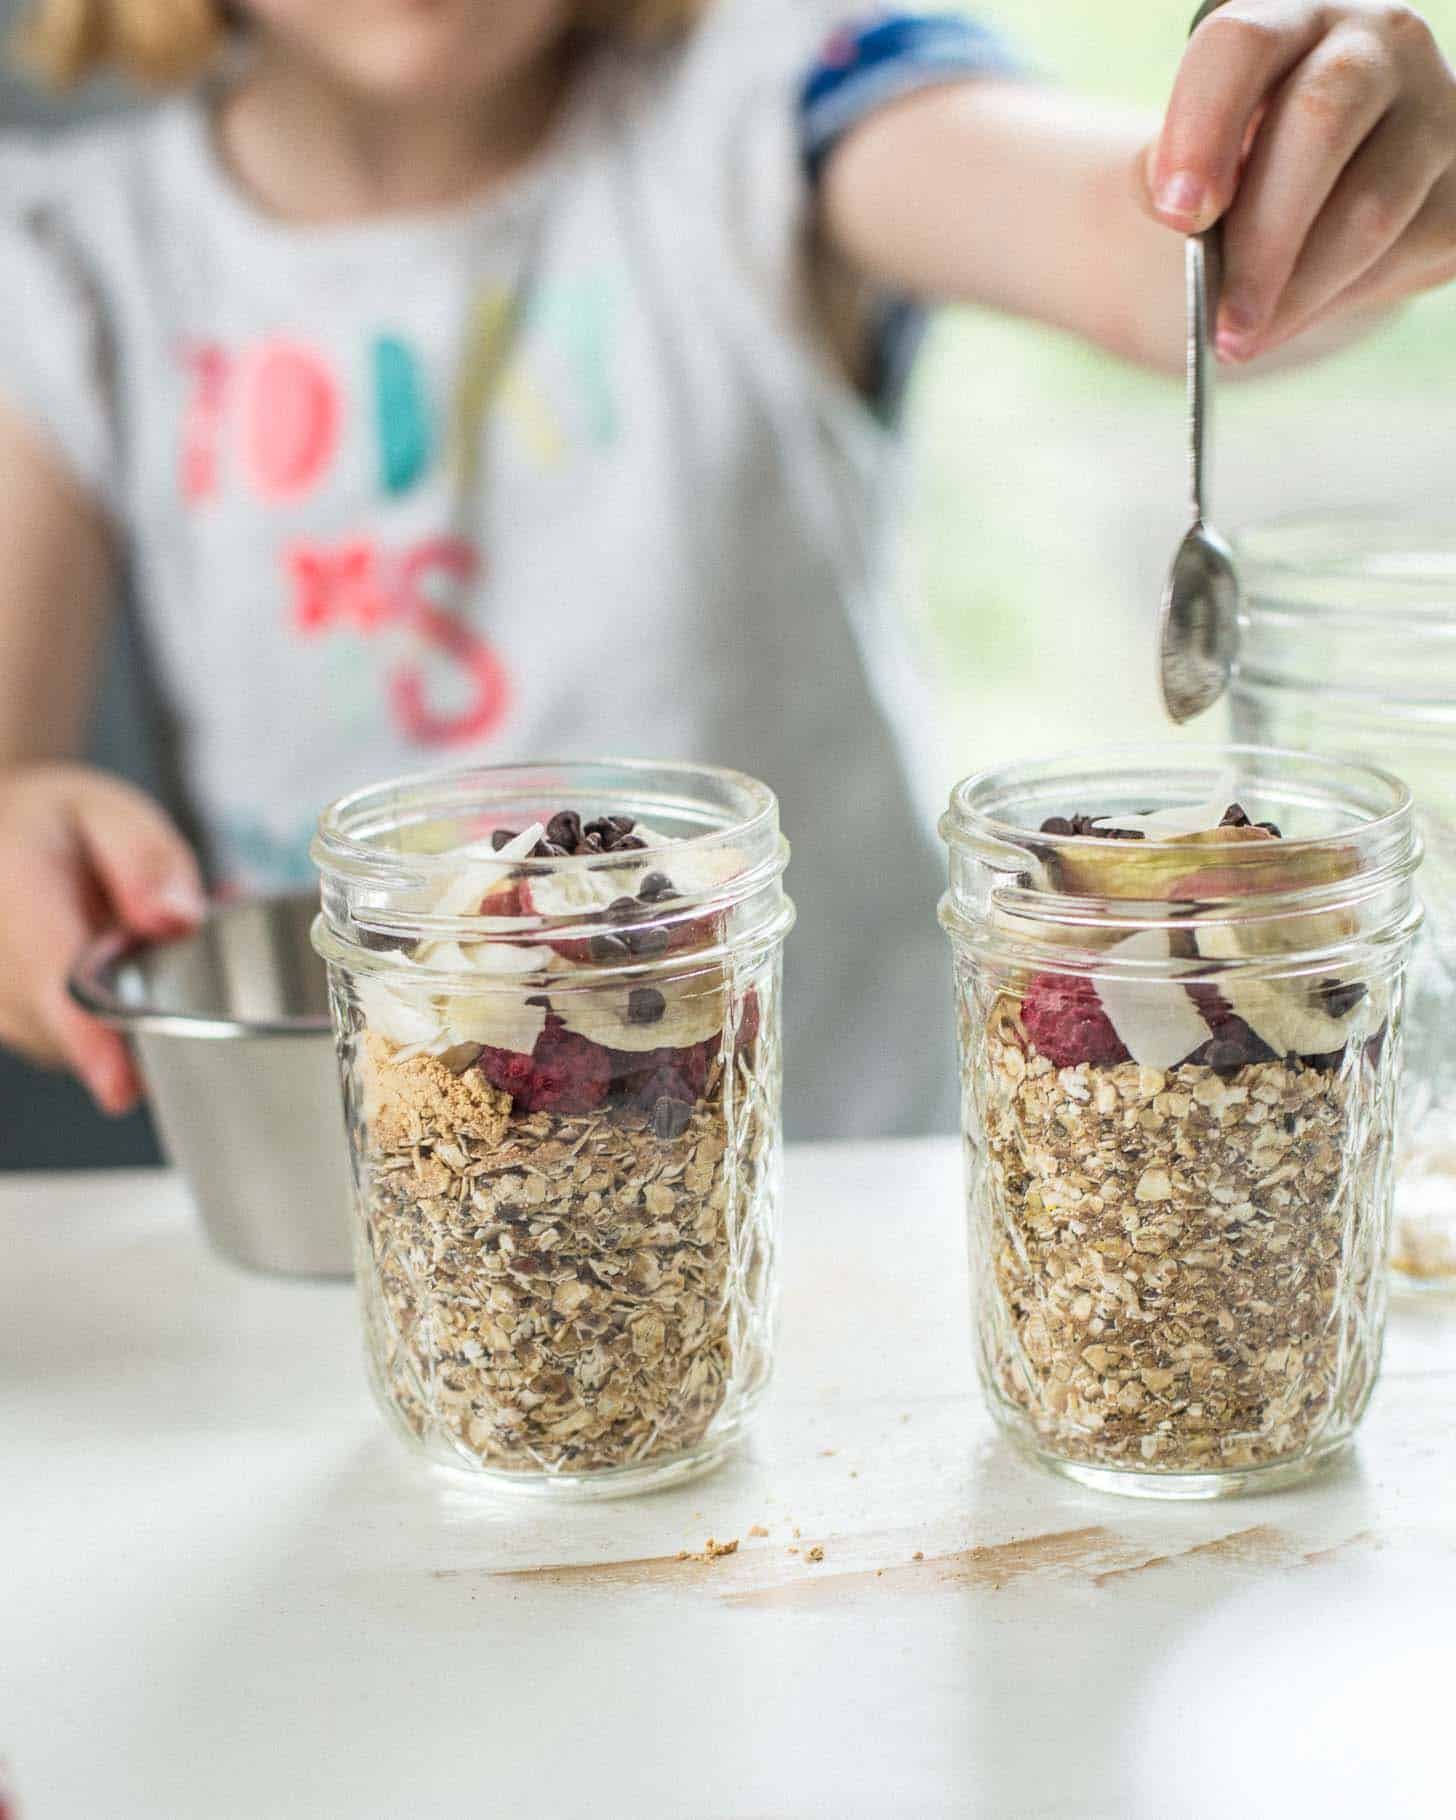 adding toppings to oatmeal